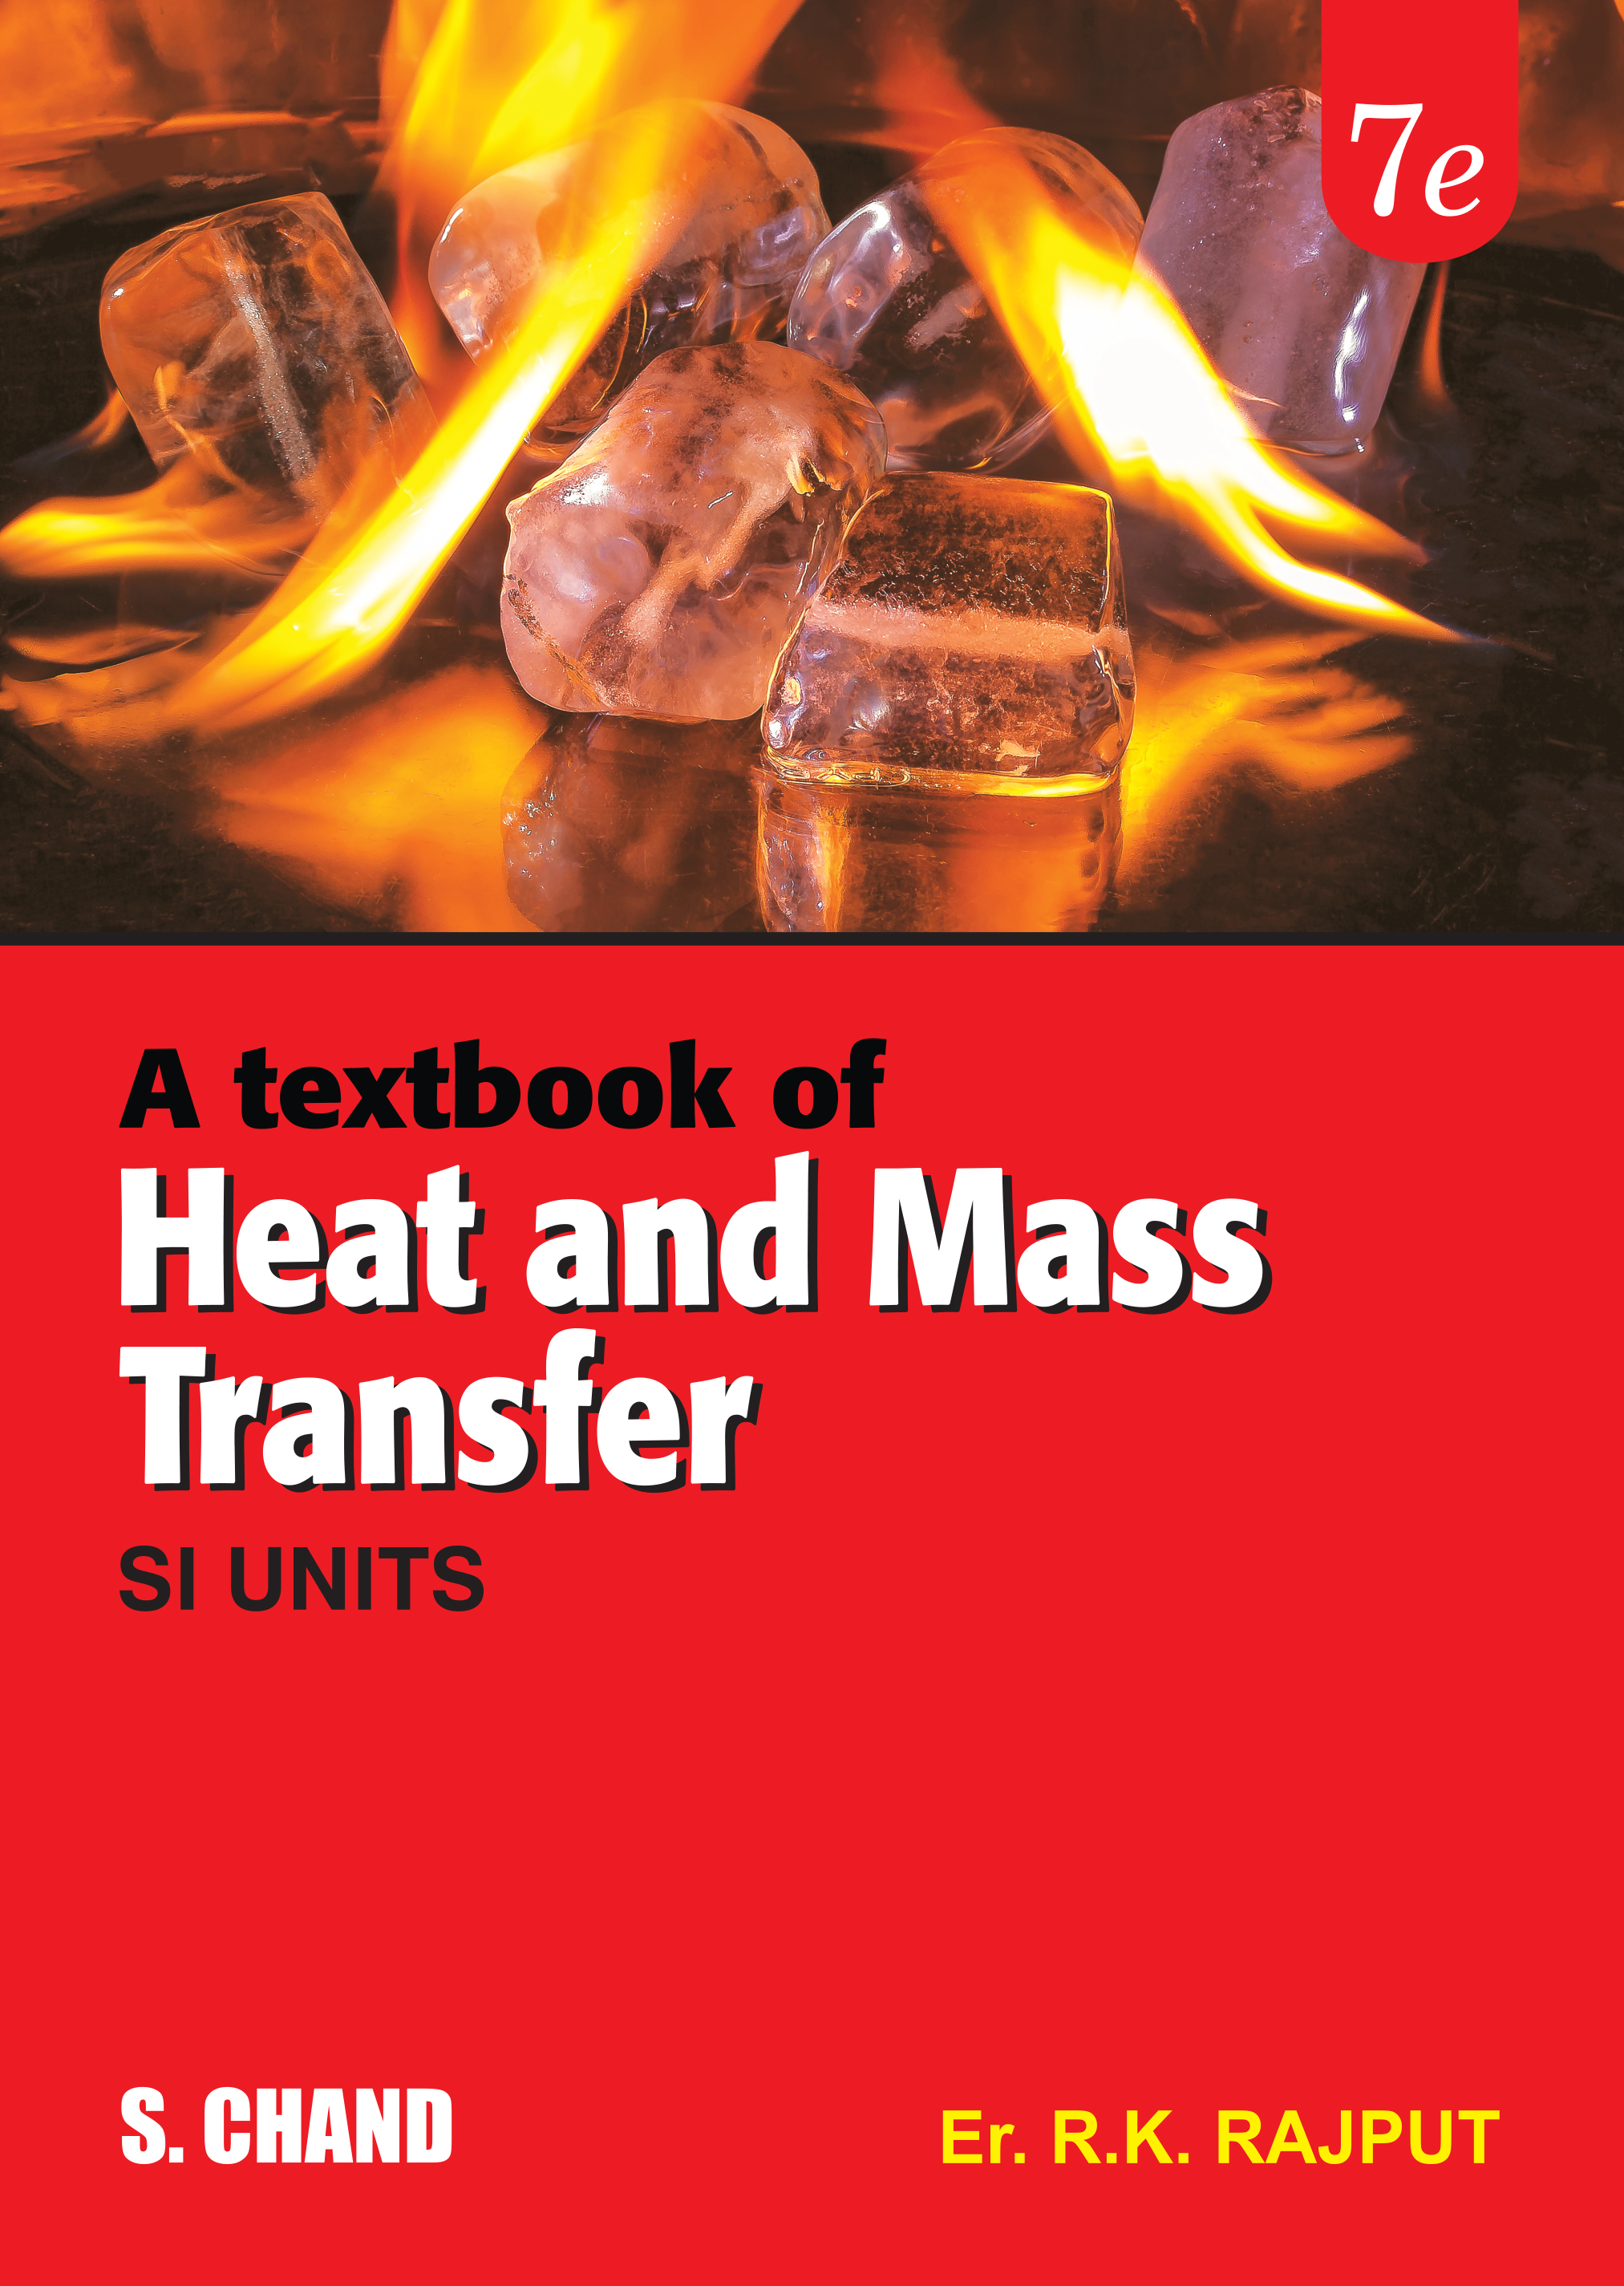 A Textbook of Heat and Mass Transfer (SI Units)